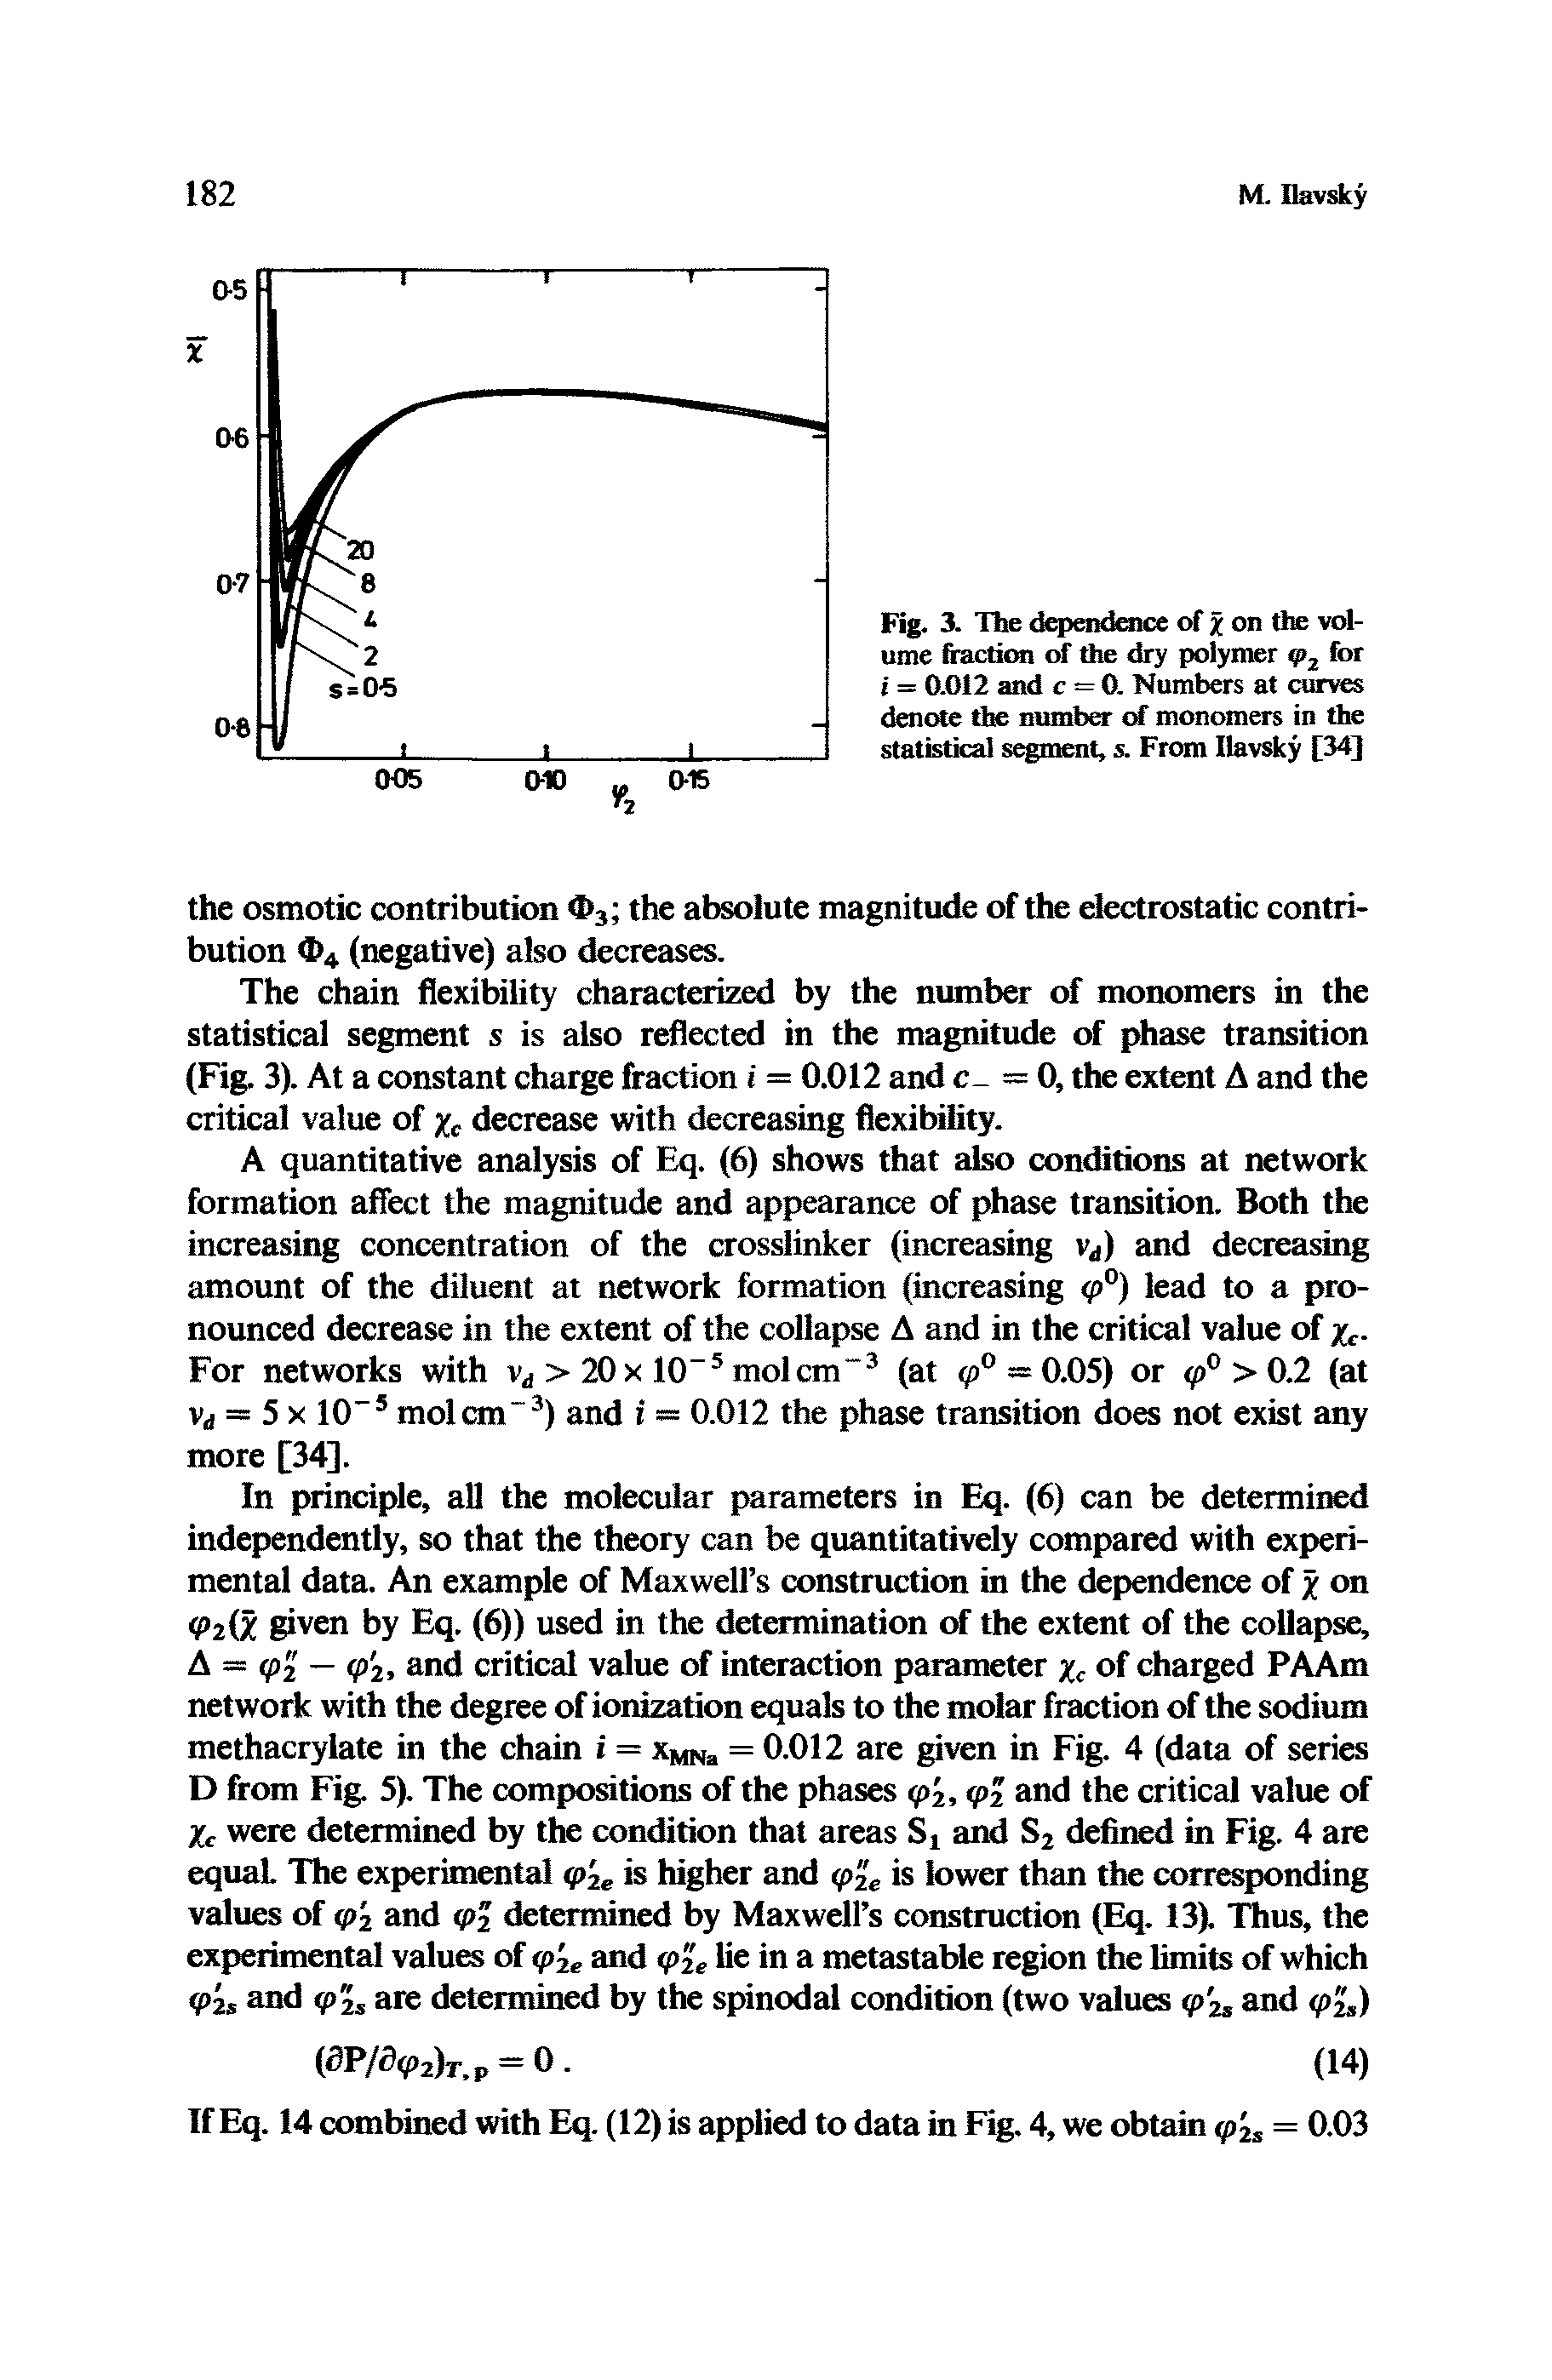 Fig. 3. The dependence of % on the volume fraction of the dry polymer tp2 for i - 0.012 and c = 0. Numbers at curves denote the number of monomers in the statistical segment, s. From Ilavsky [34]...